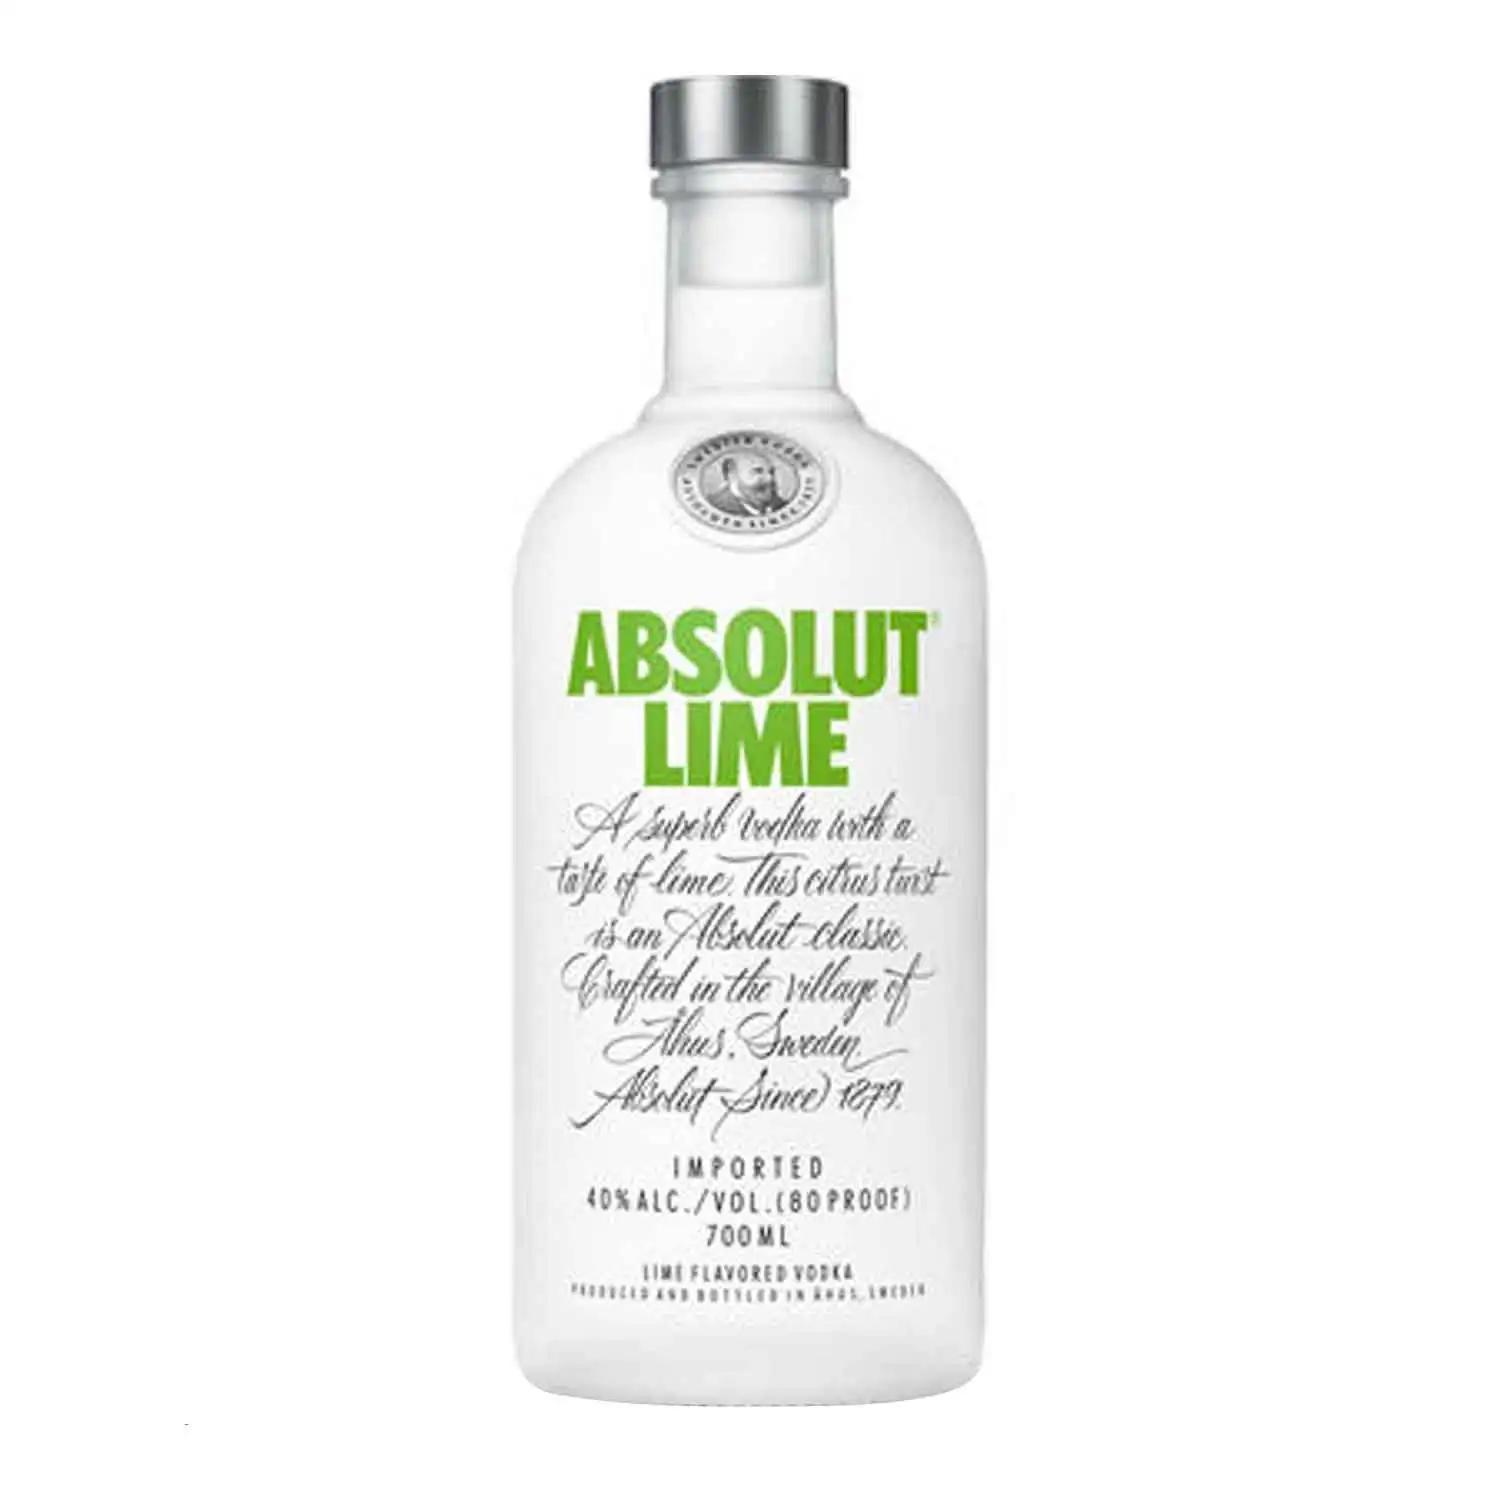 Absolut citron vert 70cl Alc 40% - Buy at Real Tobacco